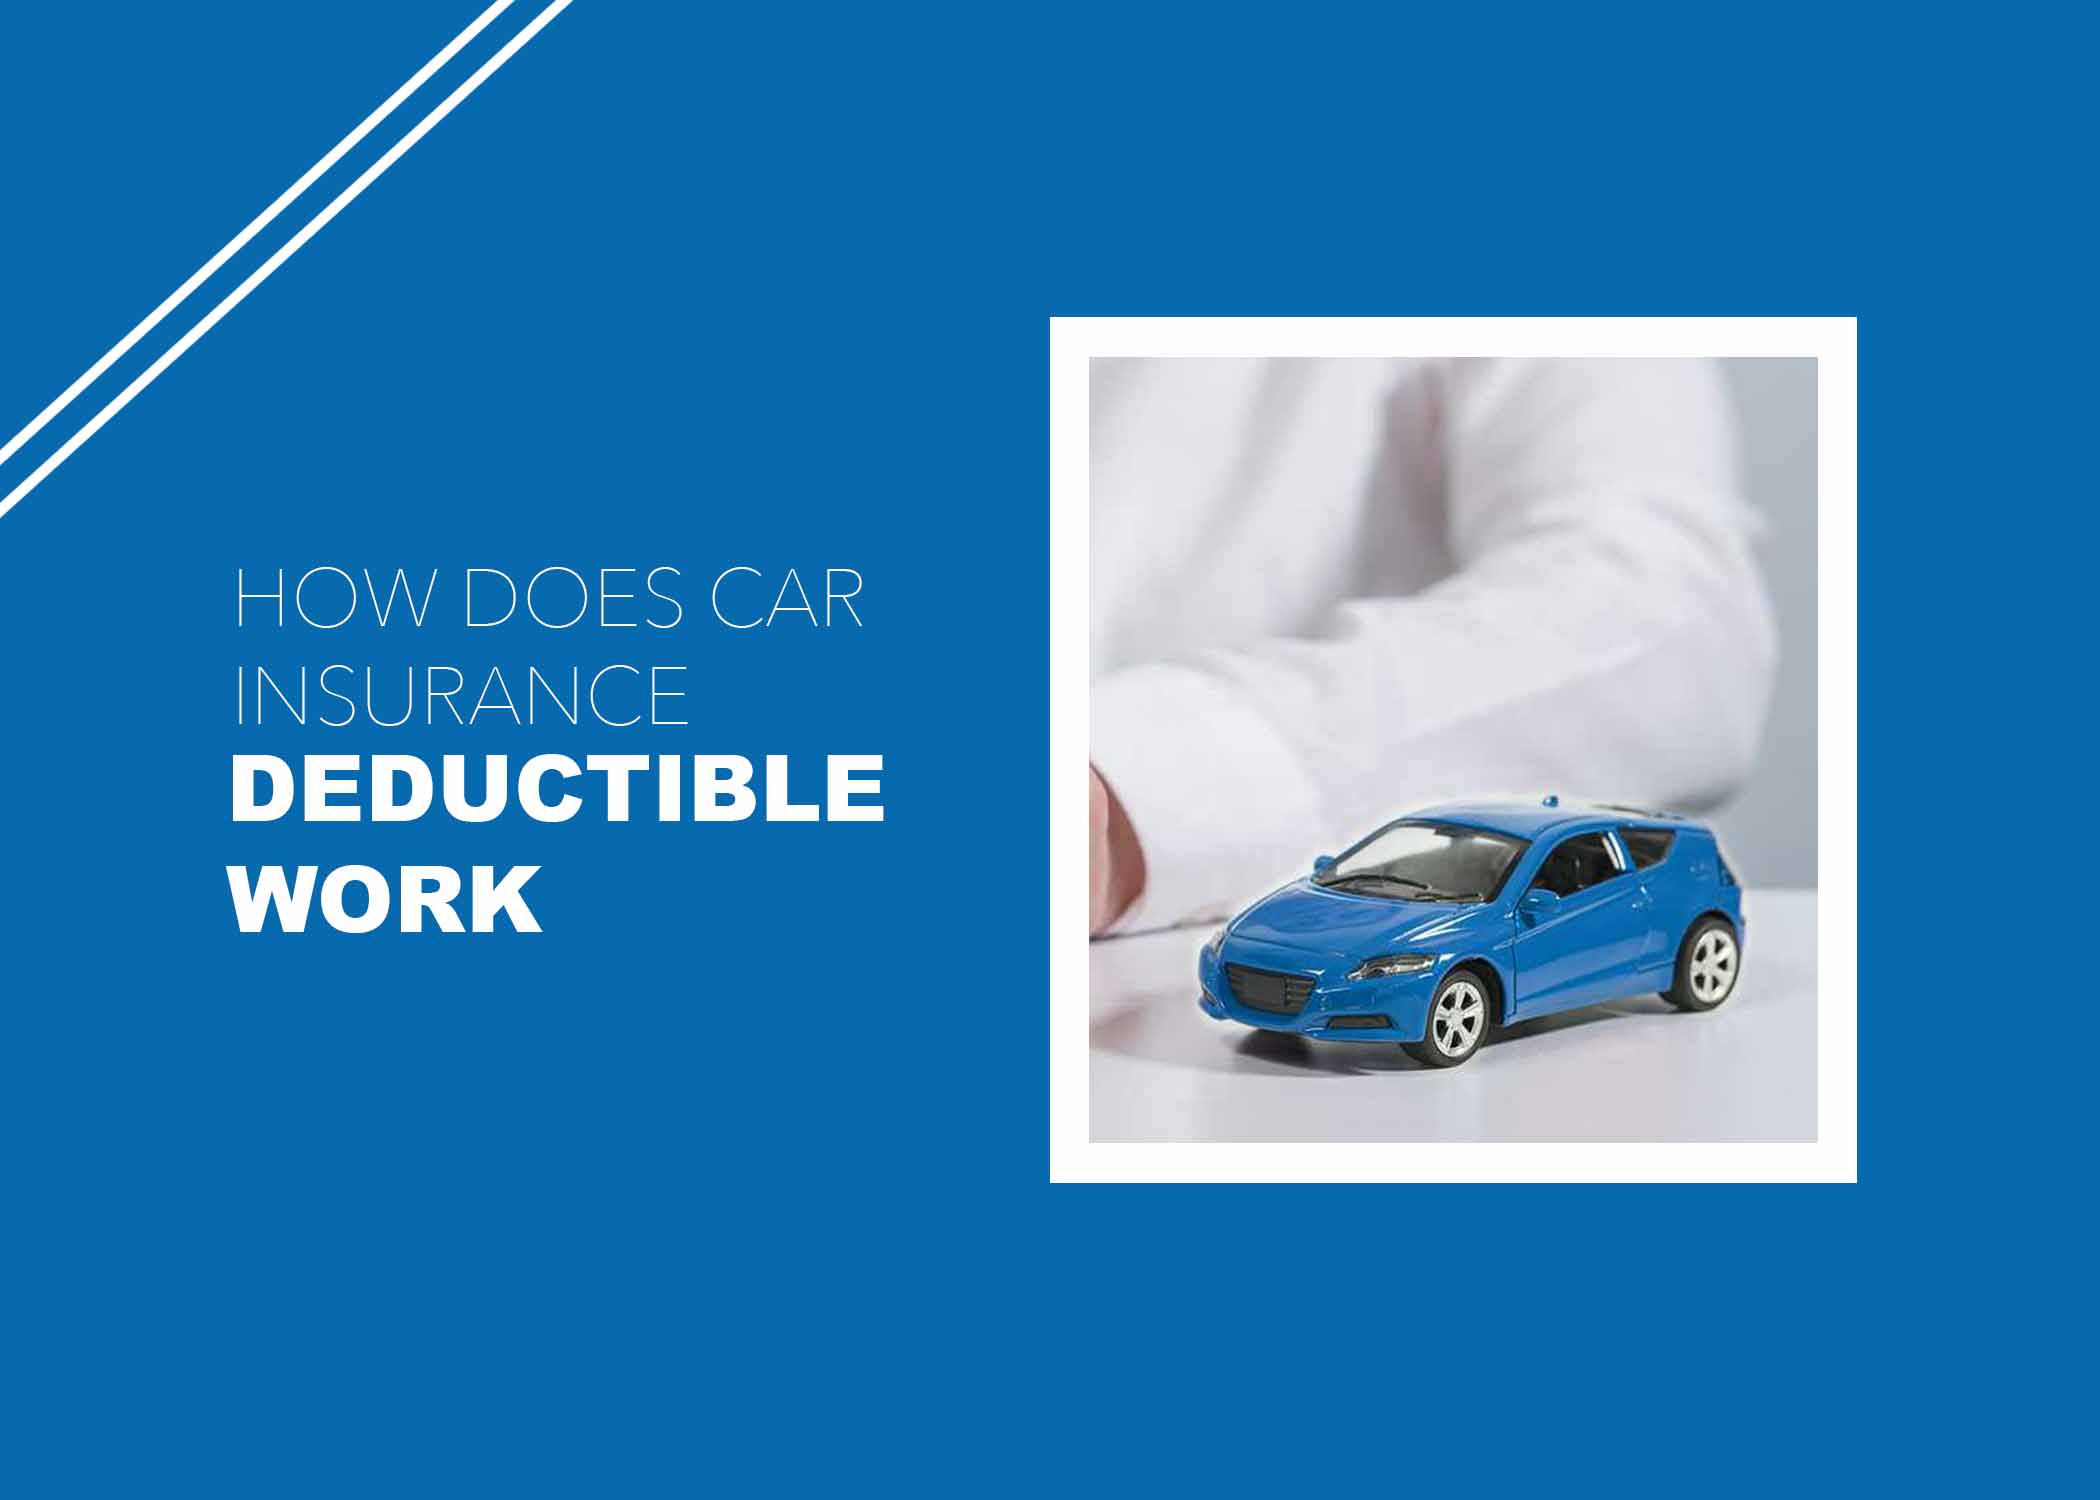 How Does Car Insurance Deductible Work?